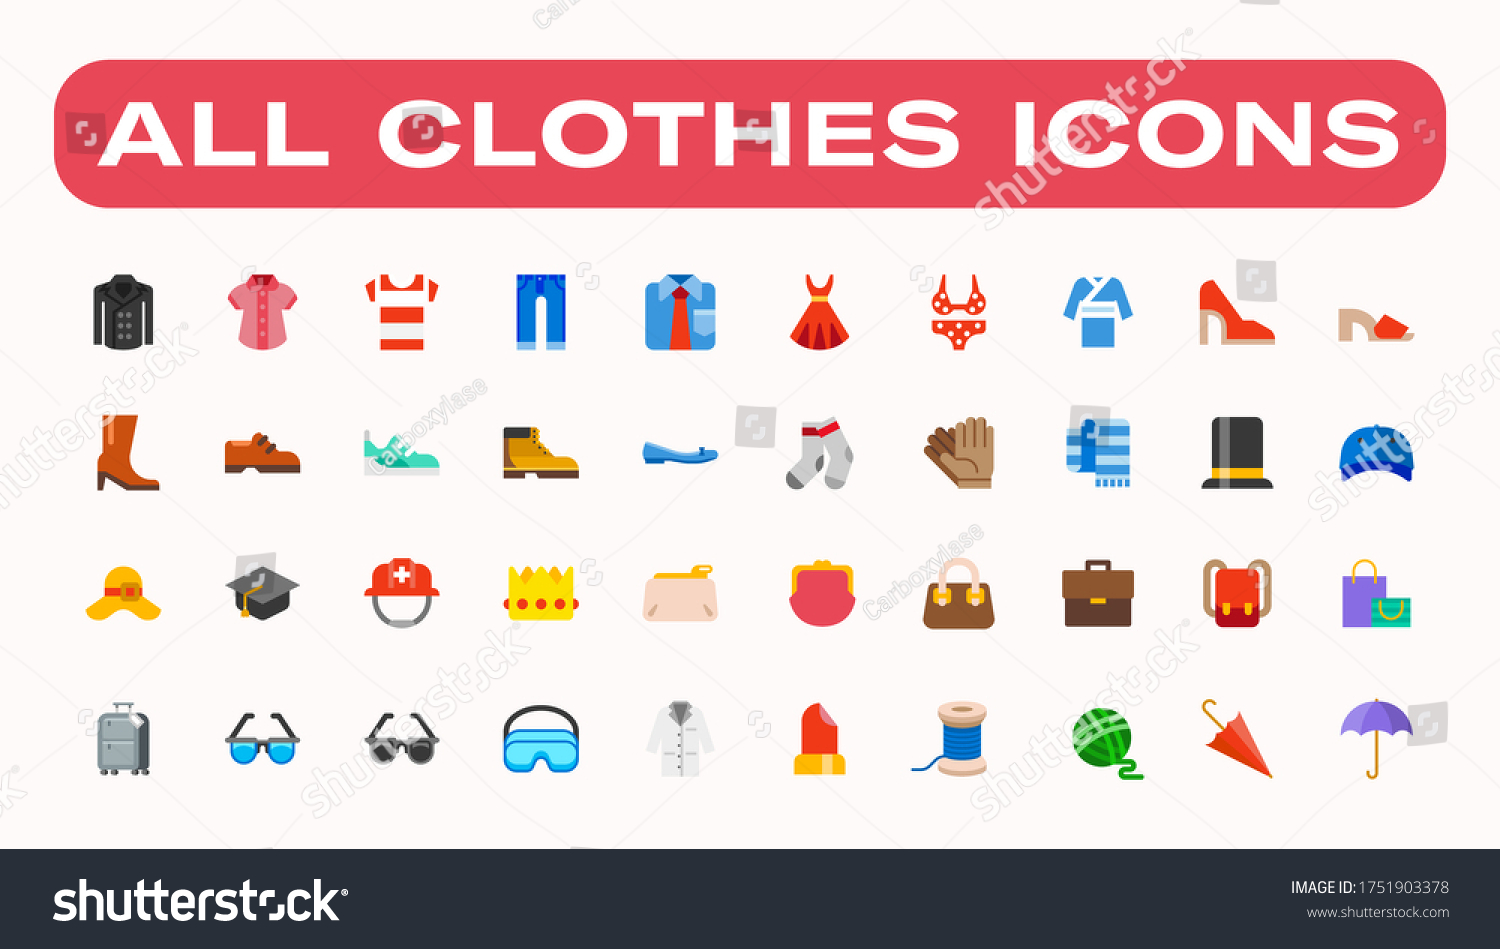 SVG of Men and women clothes vector icon set. Isolated all clothes, apparels, wears and accessories cartoon, flat style illustrations collection svg